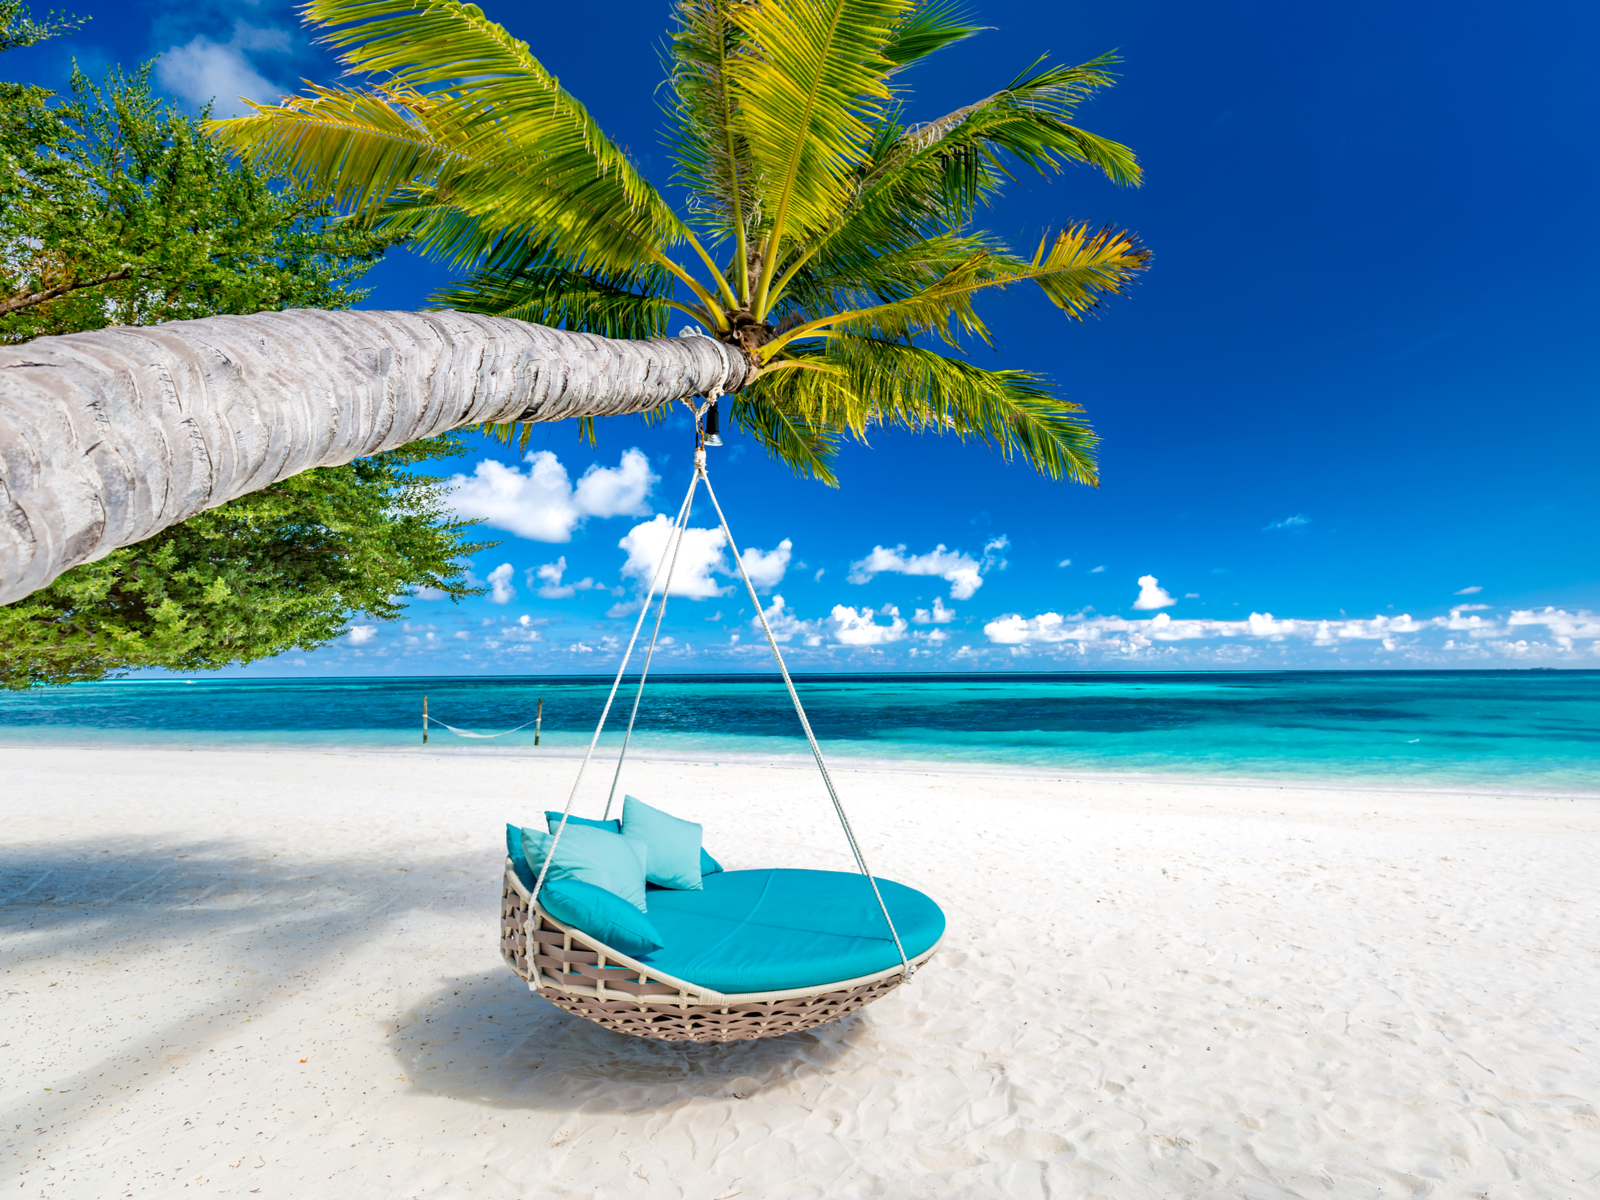 Neat view of a green wicker chair hanging from a palm tree over a beach during the best time to visit the Maldives